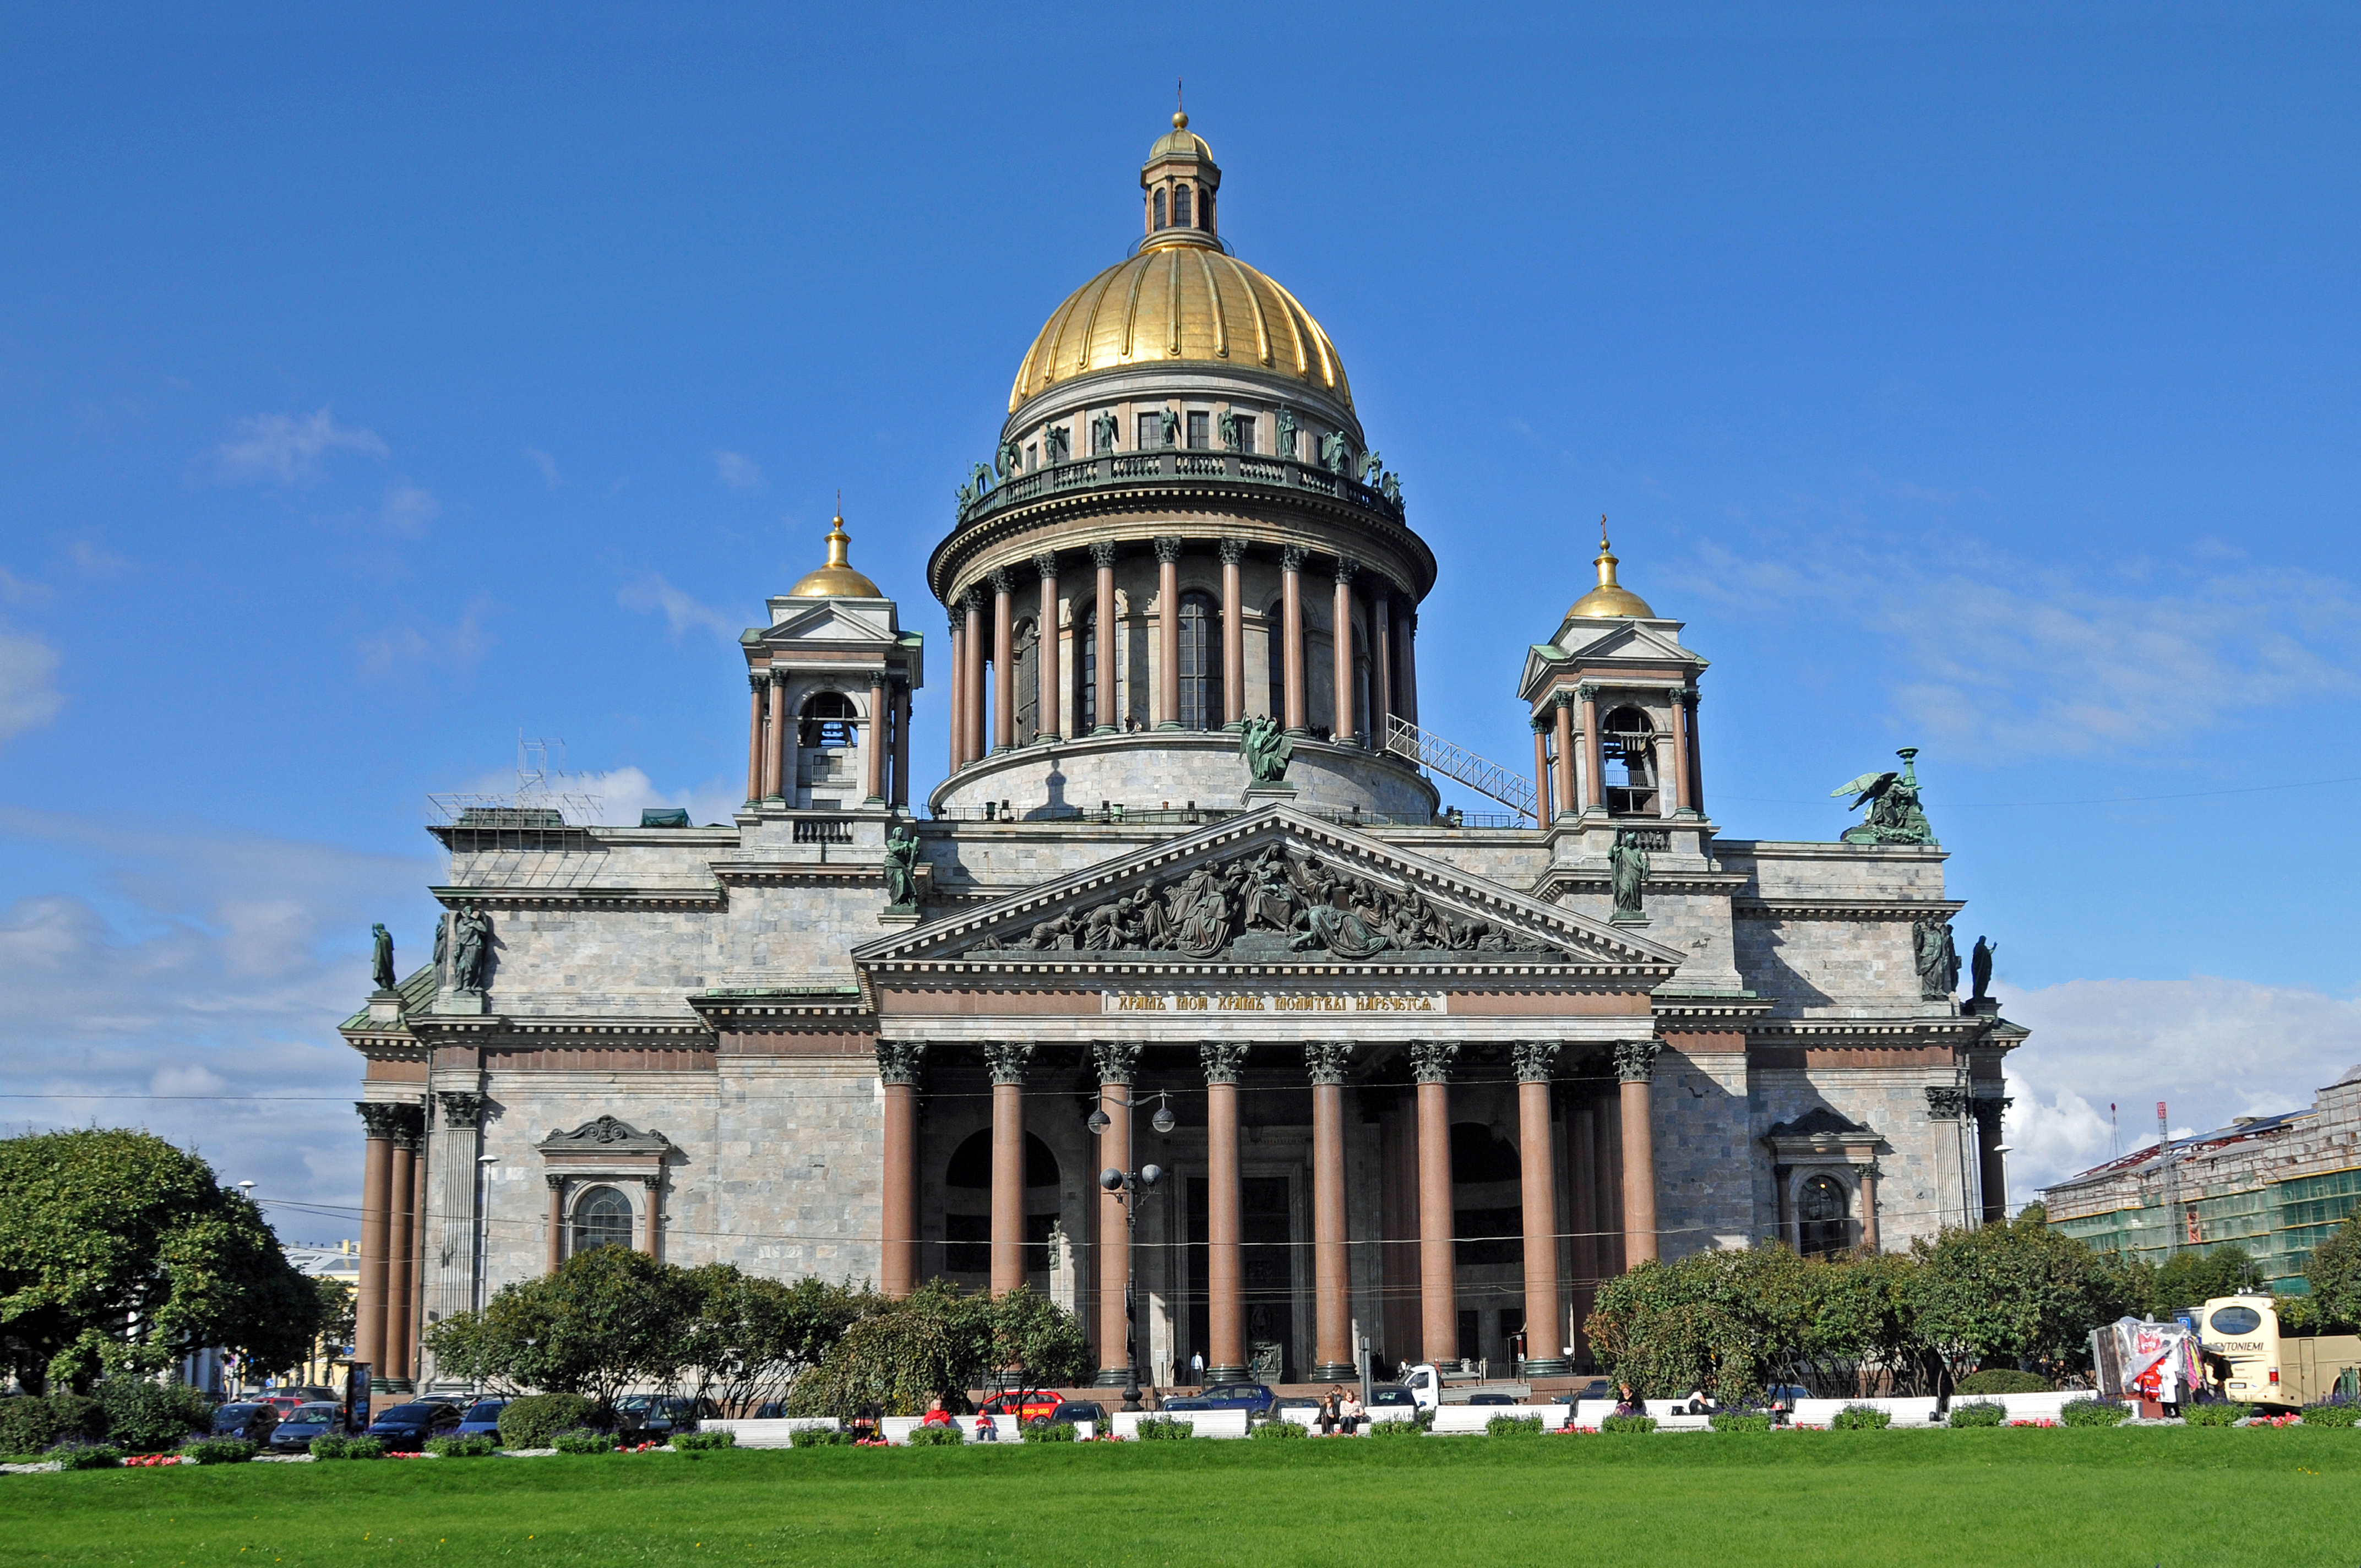 File:Russia 2213 - Saint Isaac's Cathedral.jpg - Wikimedia Commons